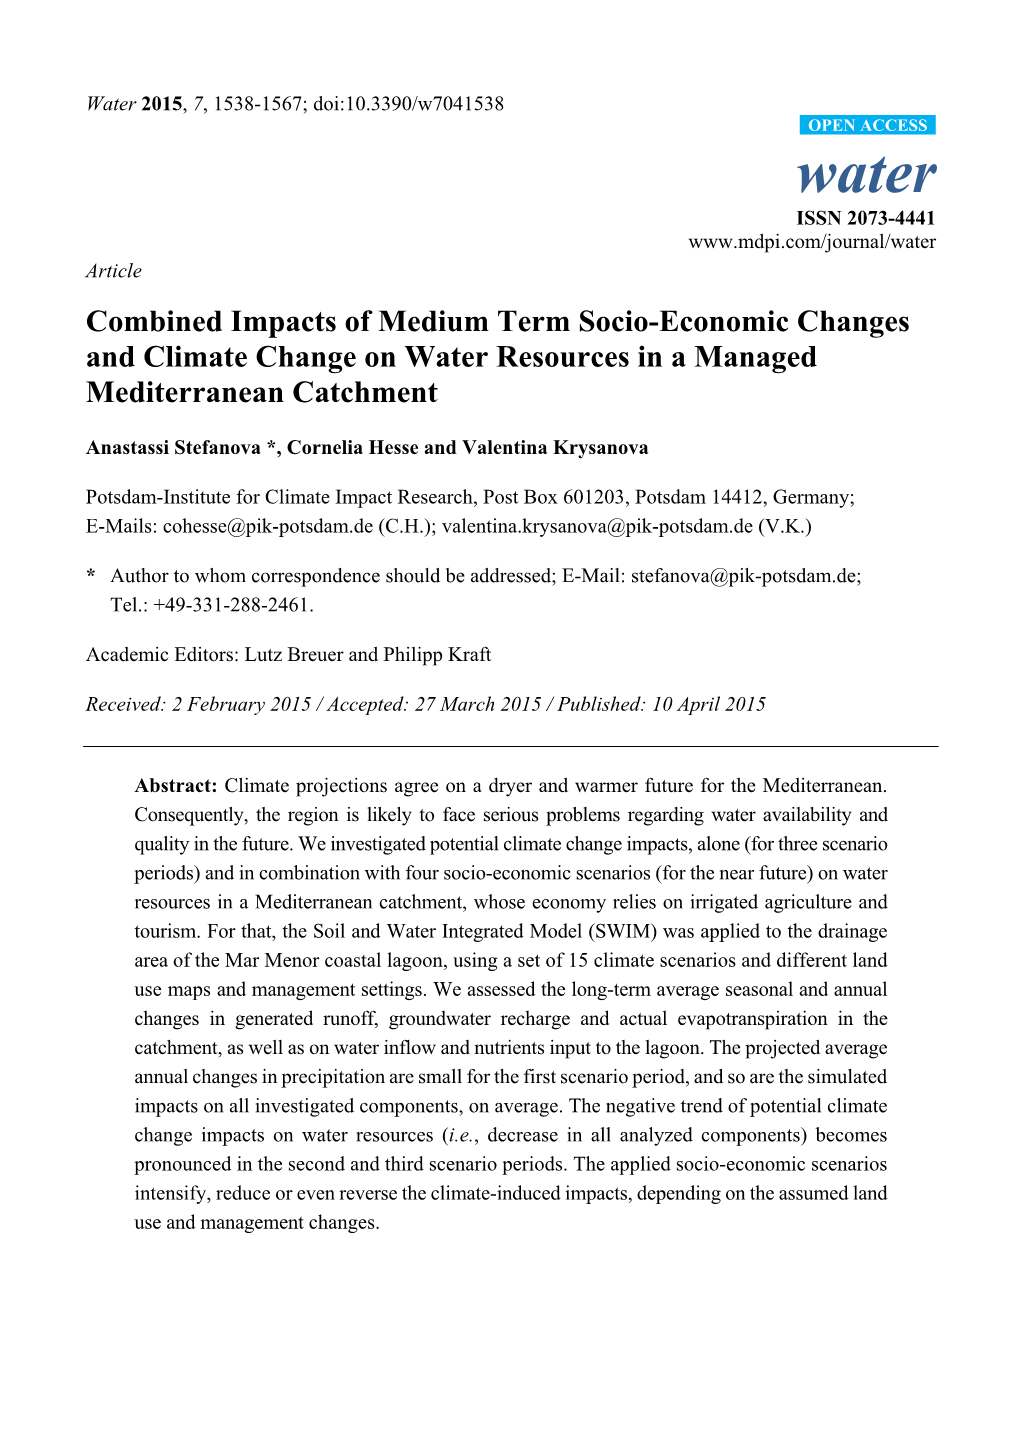 Combined Impacts of Medium Term Socio-Economic Changes and Climate Change on Water Resources in a Managed Mediterranean Catchment